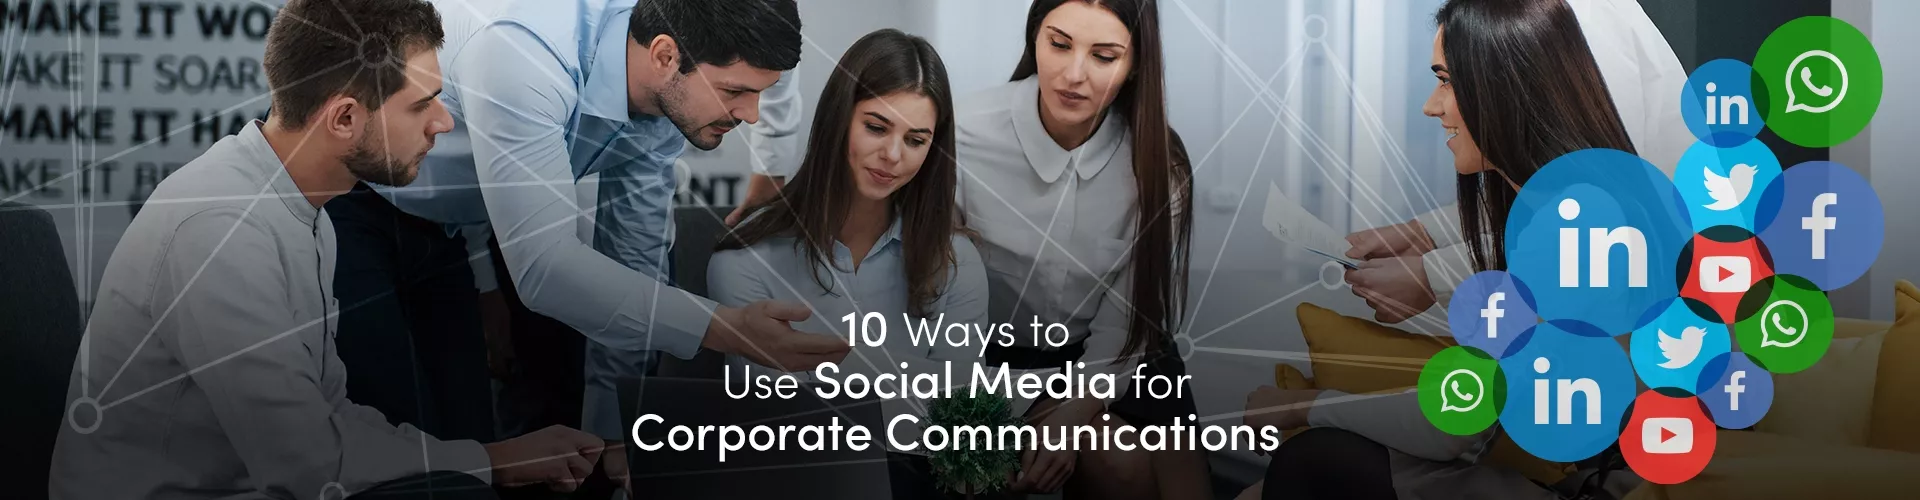 10 Ways to Use Social Media for Corporate Communications